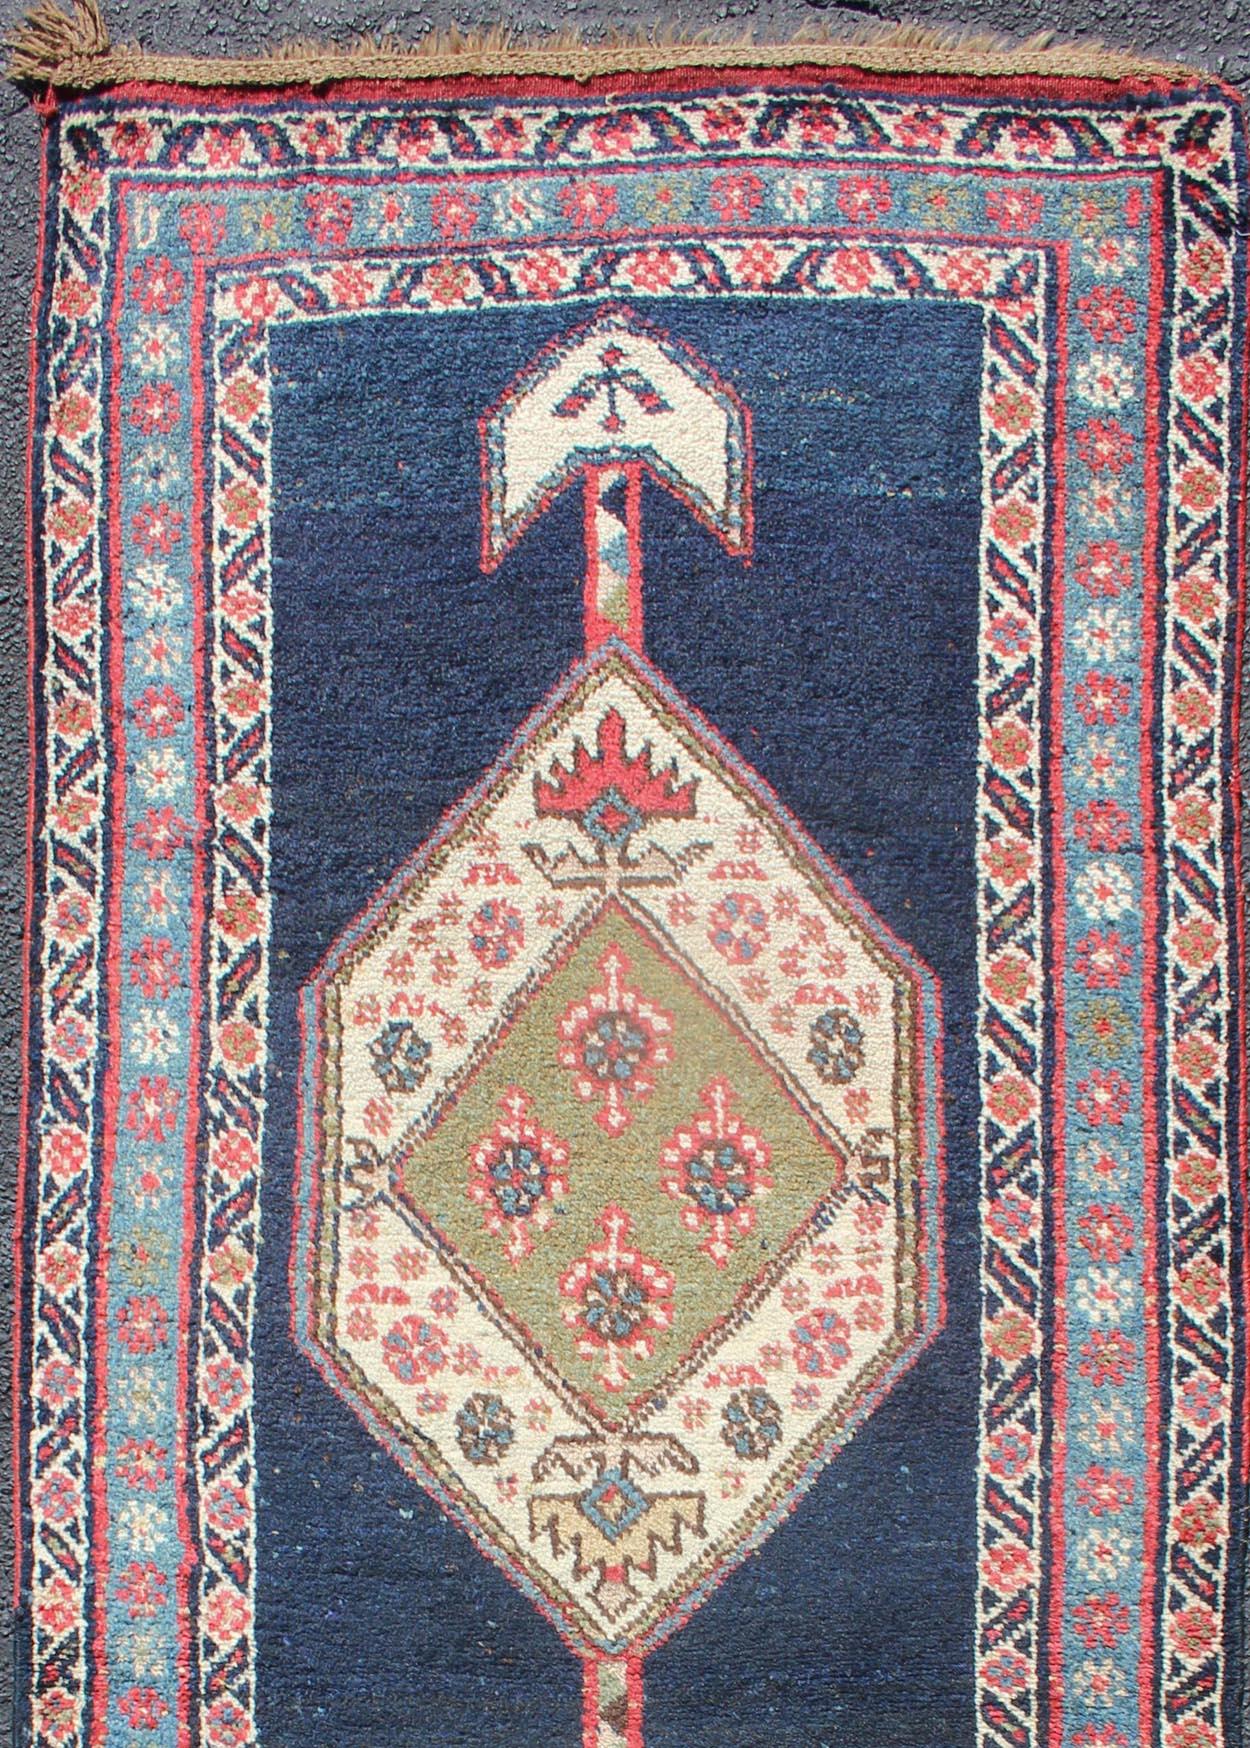 Double-pointed arrow design antique Persian Kurdish runner in Blue and light red , rug PR-M519, country of origin / type: Iran / Kurdish, circa 1900

This Kurdish tribal rug was woven by Kurdish weavers in western Persia. Often they used this